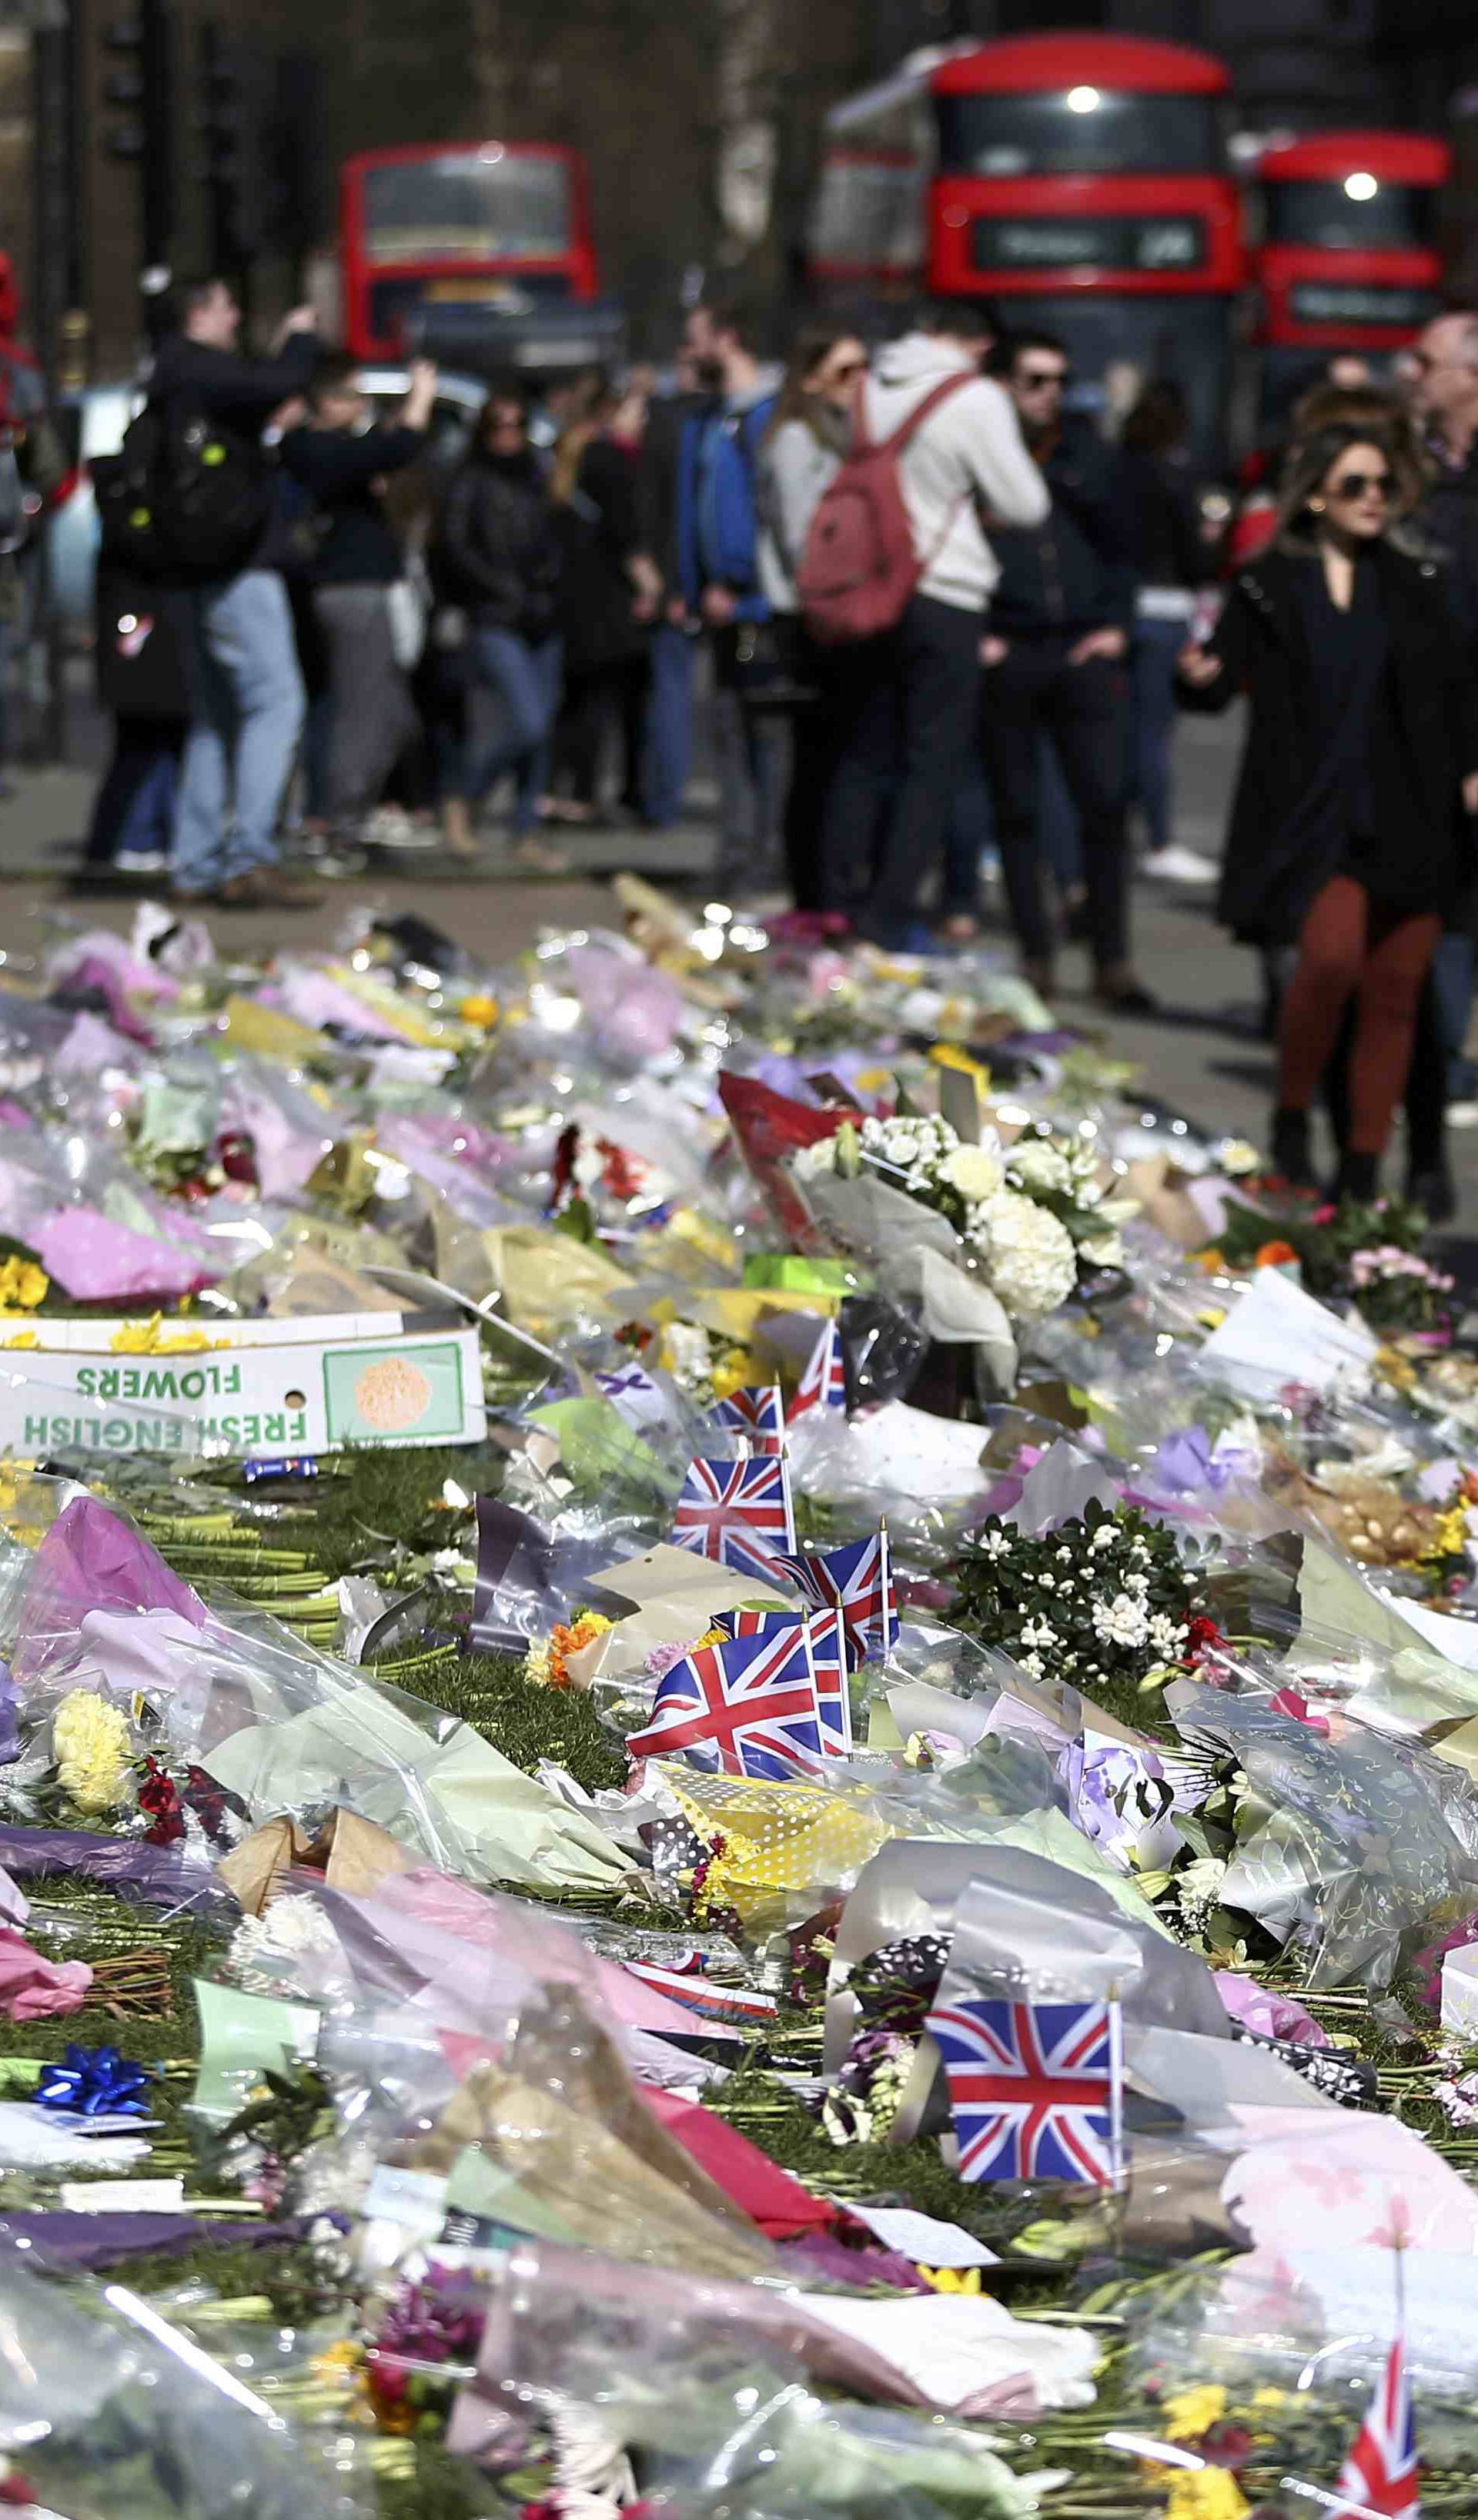 Onlookers view floral tributes laid in Parliament Square following the attack in Westminster earlier in the week